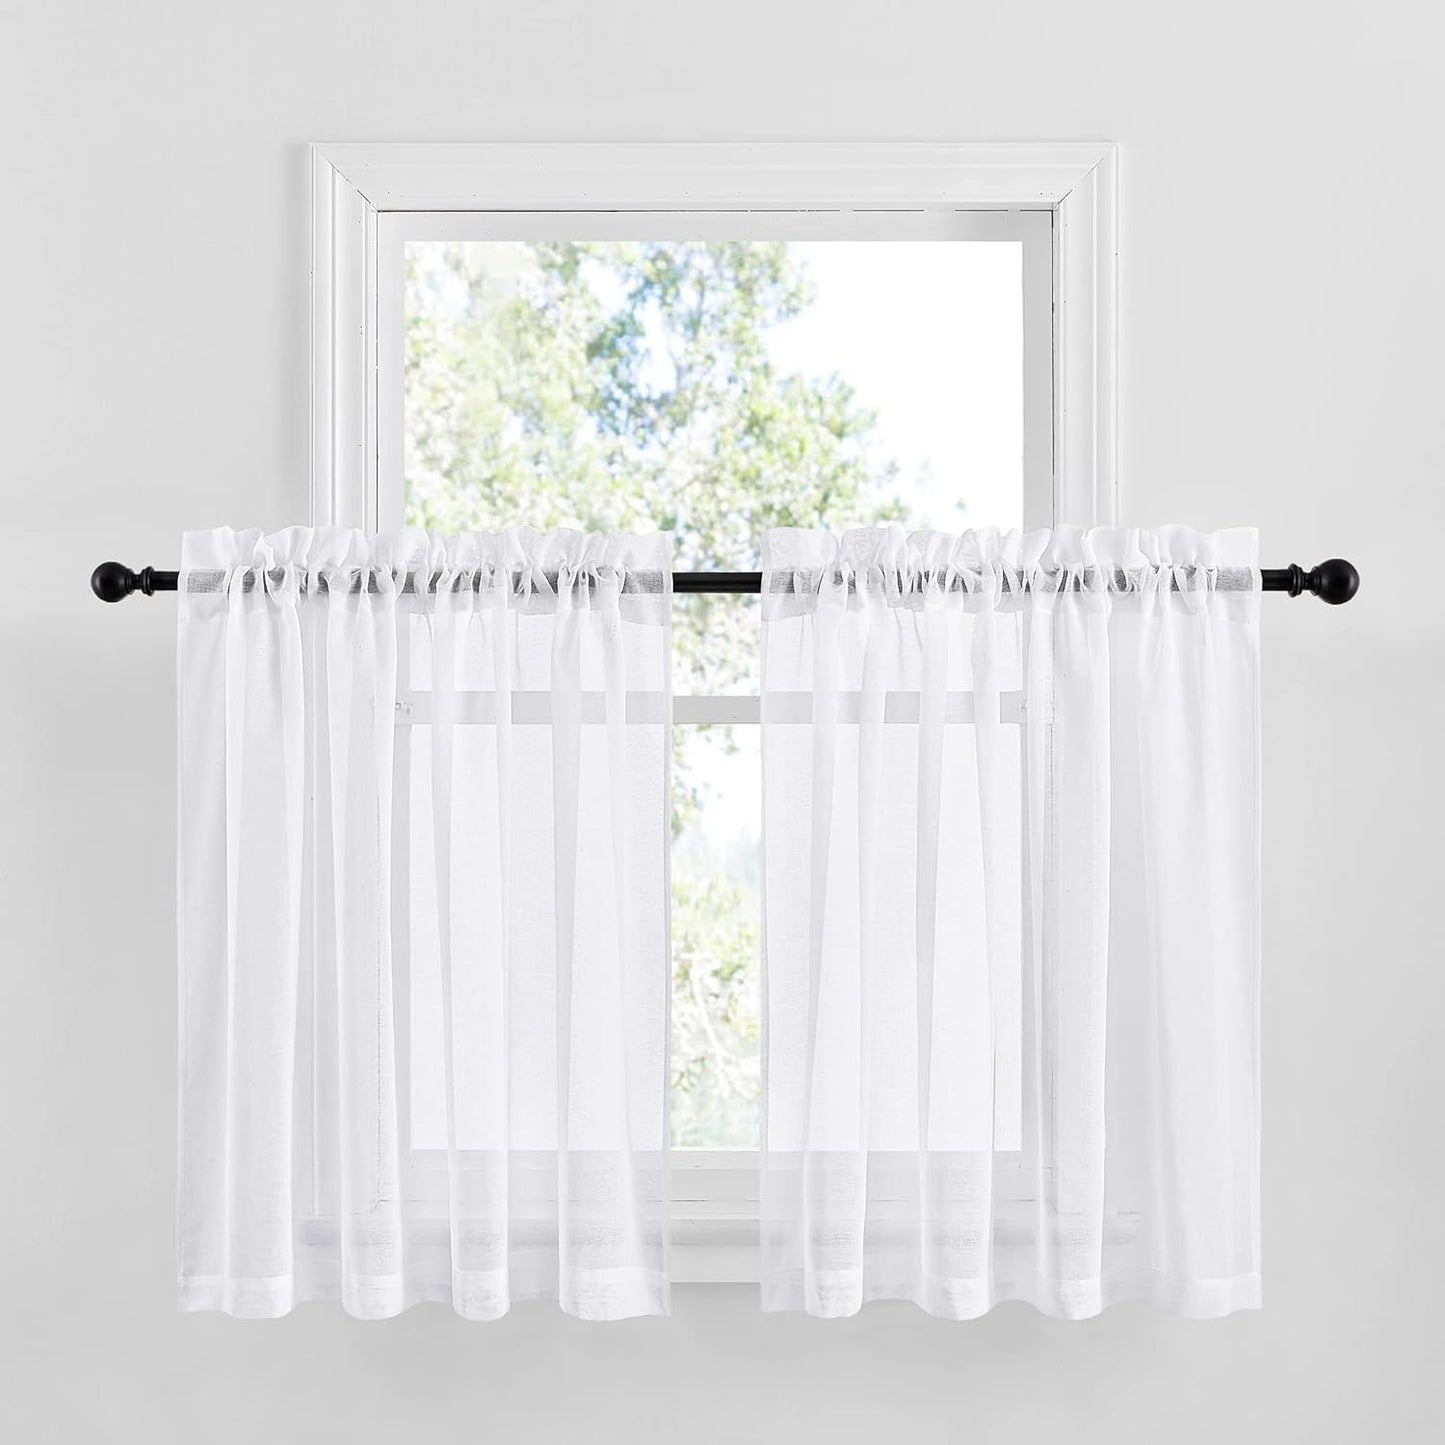 NICETOWN White Semi Sheer Curtains for Living Room- Linen Texture Light Airy Drapes, Rod Pocket & Back Tab Design Voile Panels for Large Window, Set of 2, 55 X 108 Inch  NICETOWN White - Rod Pocket Only W55 X L36 